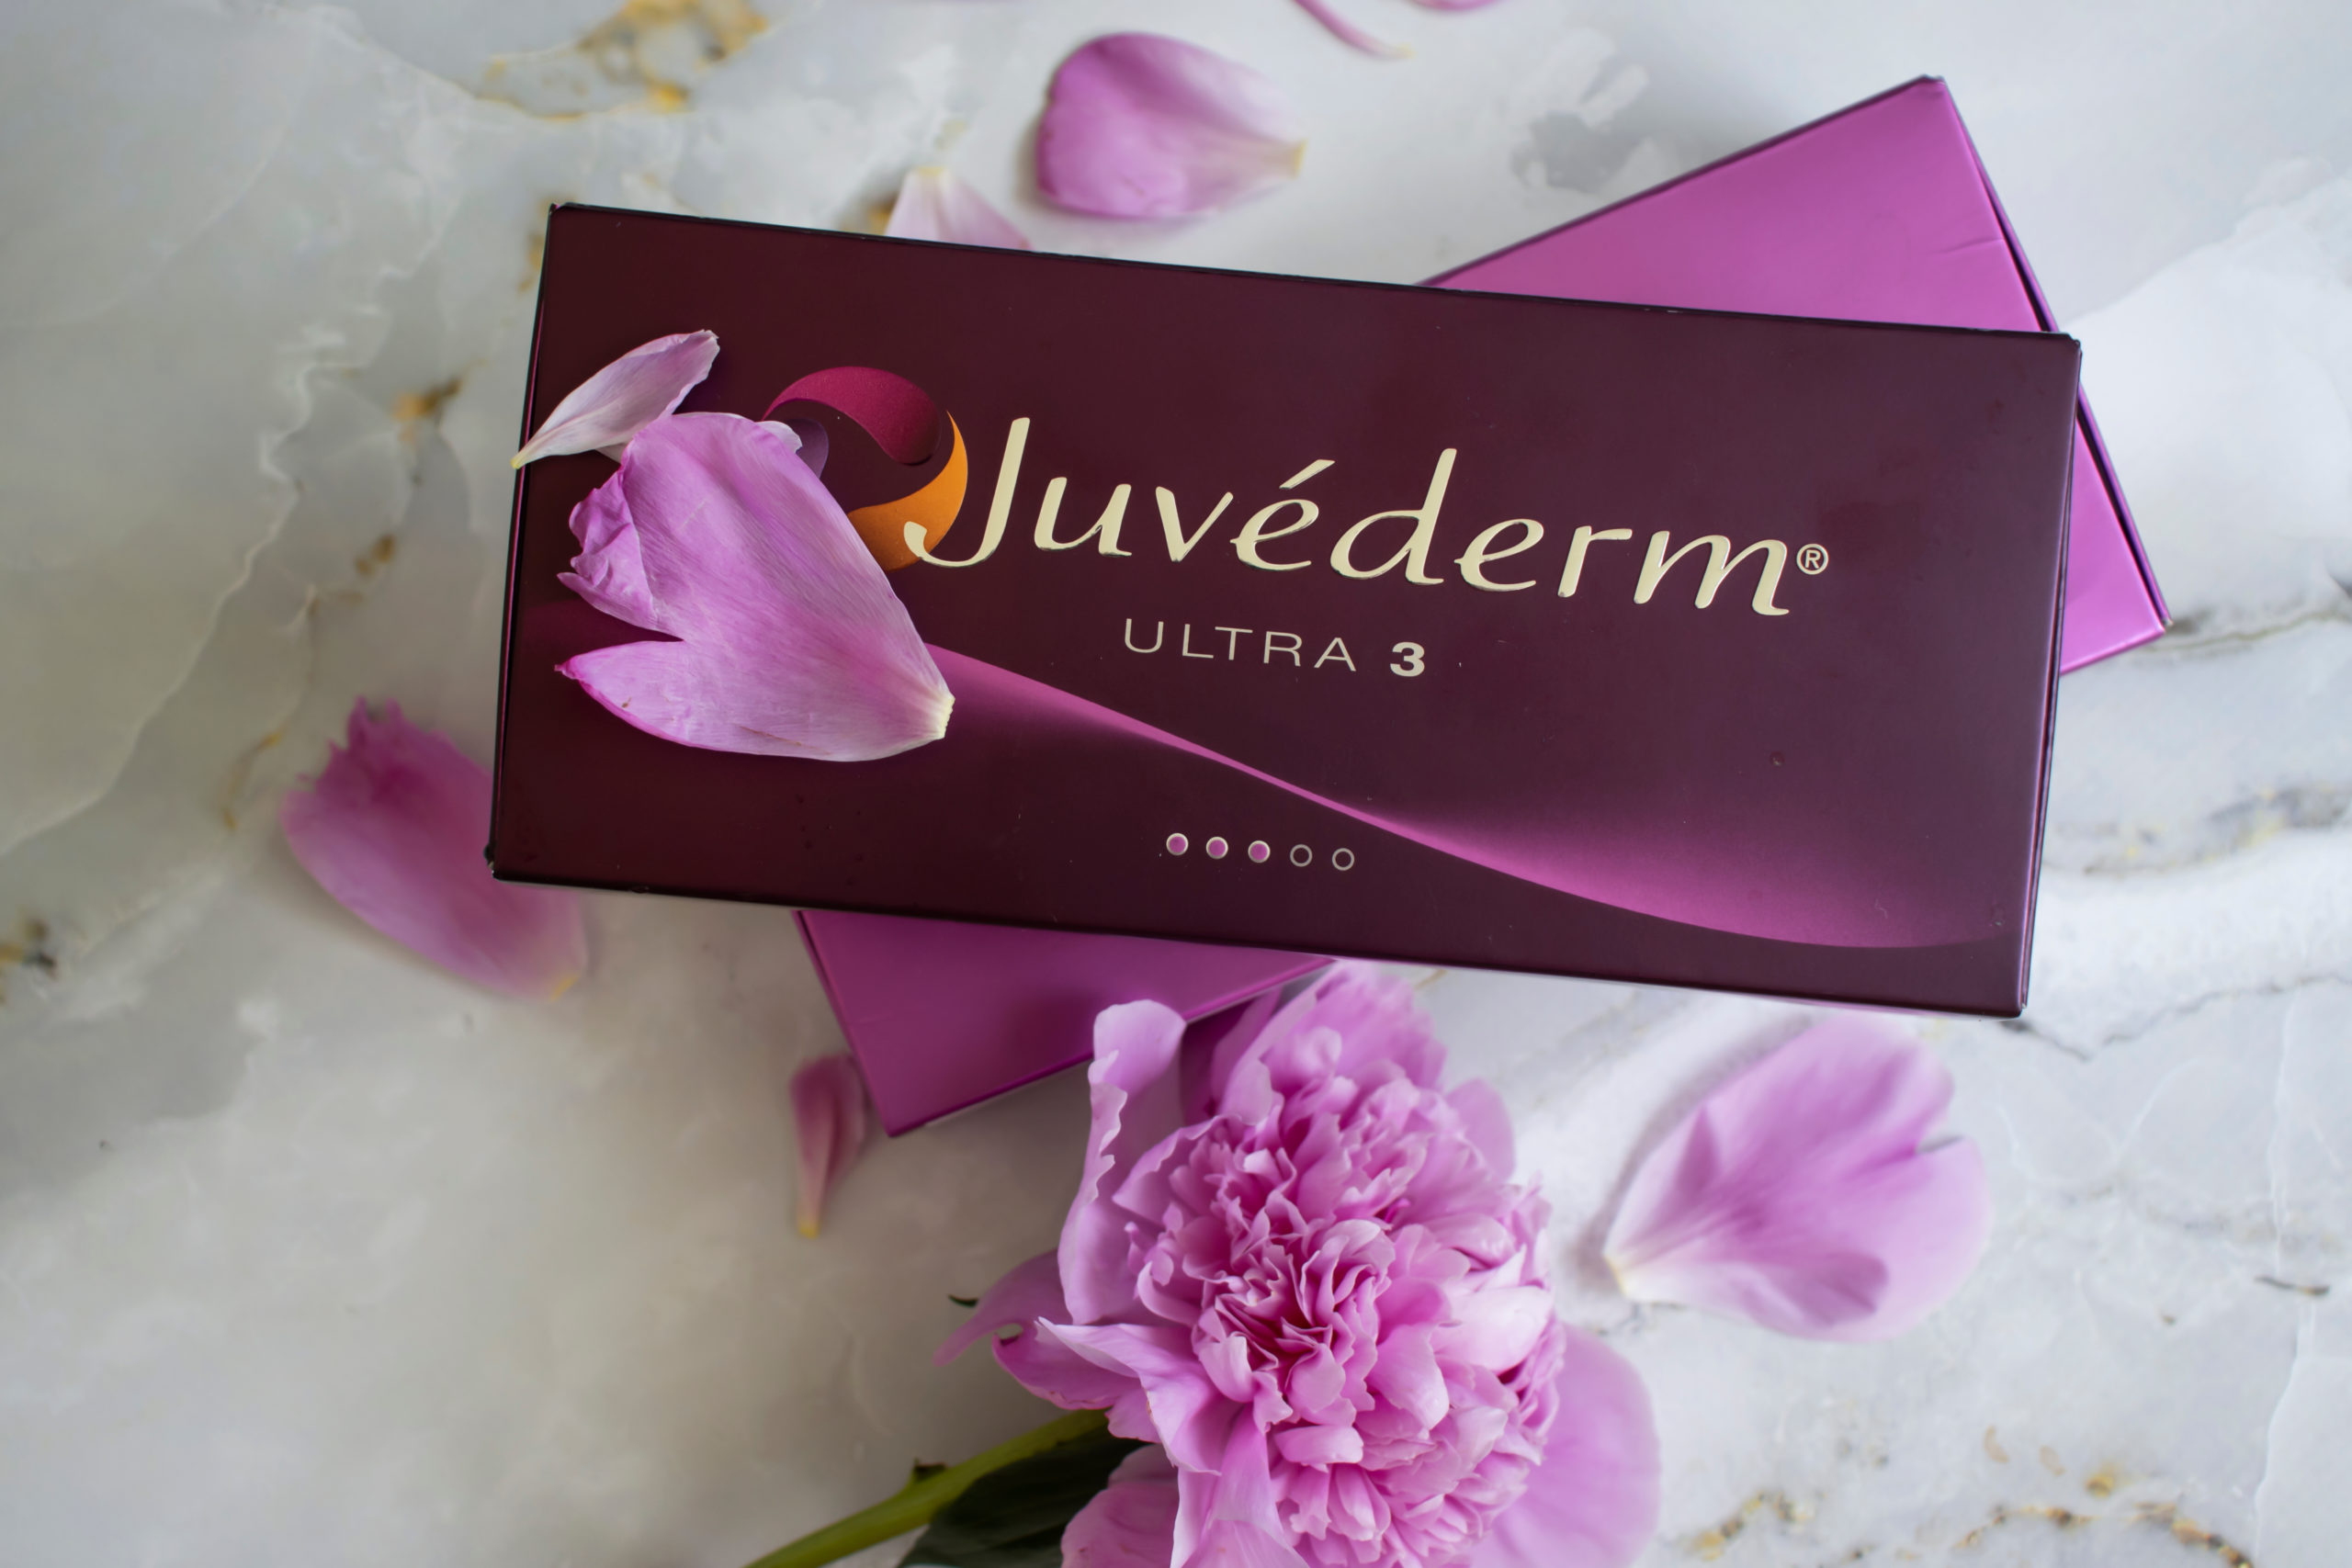 10 Things You Need to Know About Juvederm